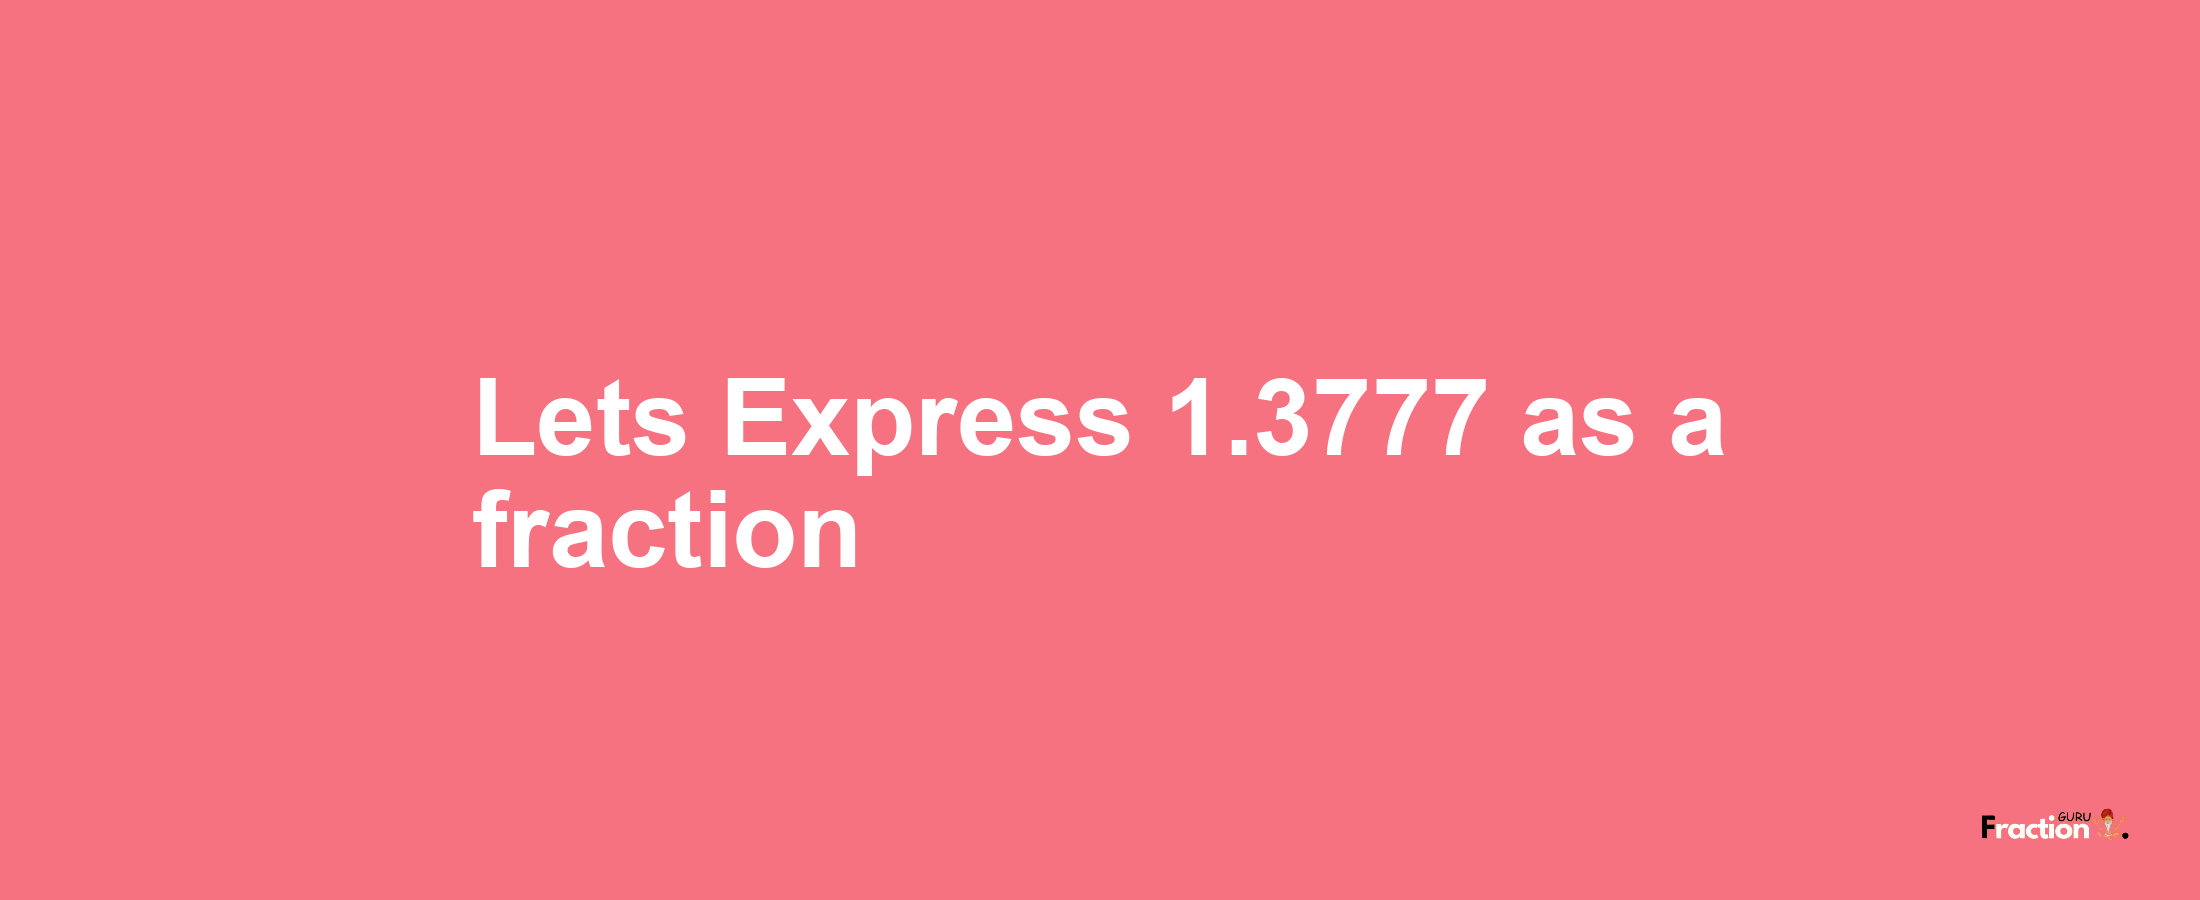 Lets Express 1.3777 as afraction